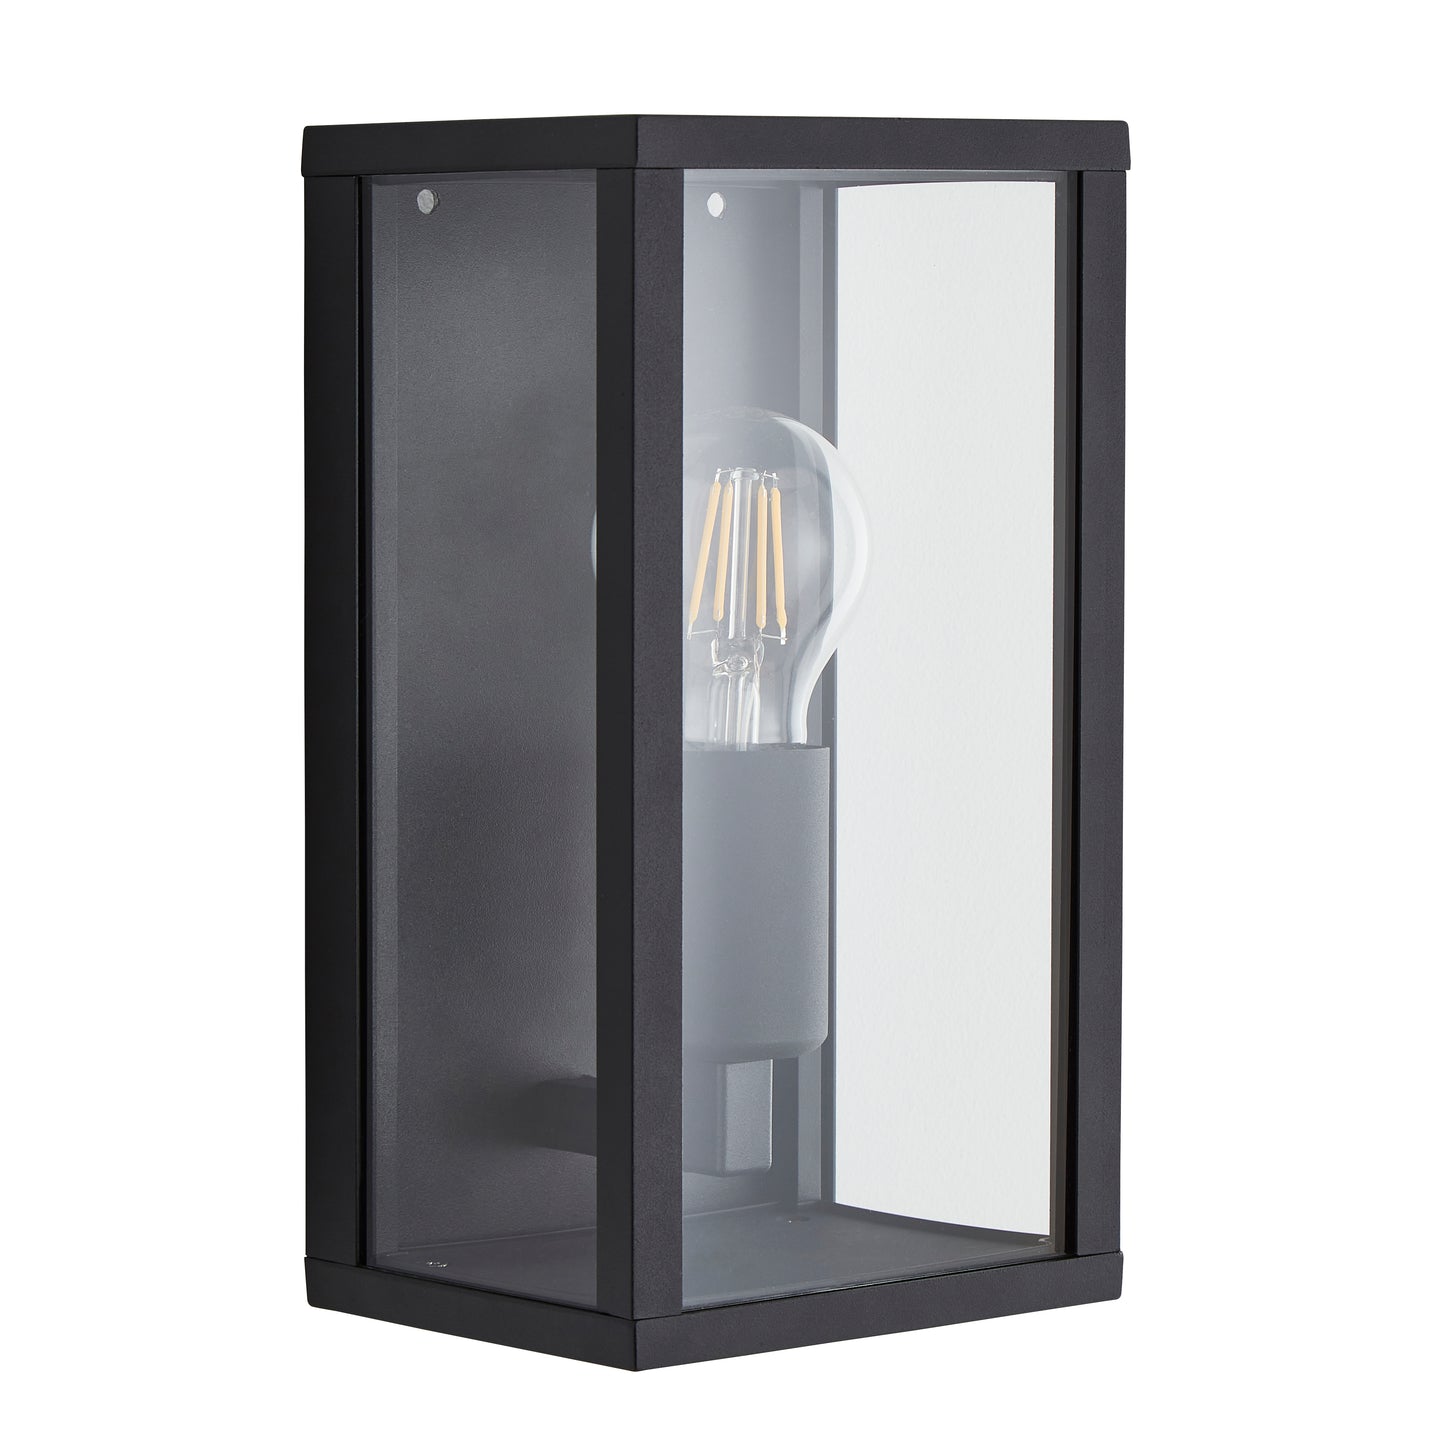 A modern take on a traditional design outdoor wall light perfect for adding style and security The traditional front-door lantern has had a modern make over in the form of our Seb wall light with its square glass windows a striking die cast matt black finish this is sure to add an statement to any wall 